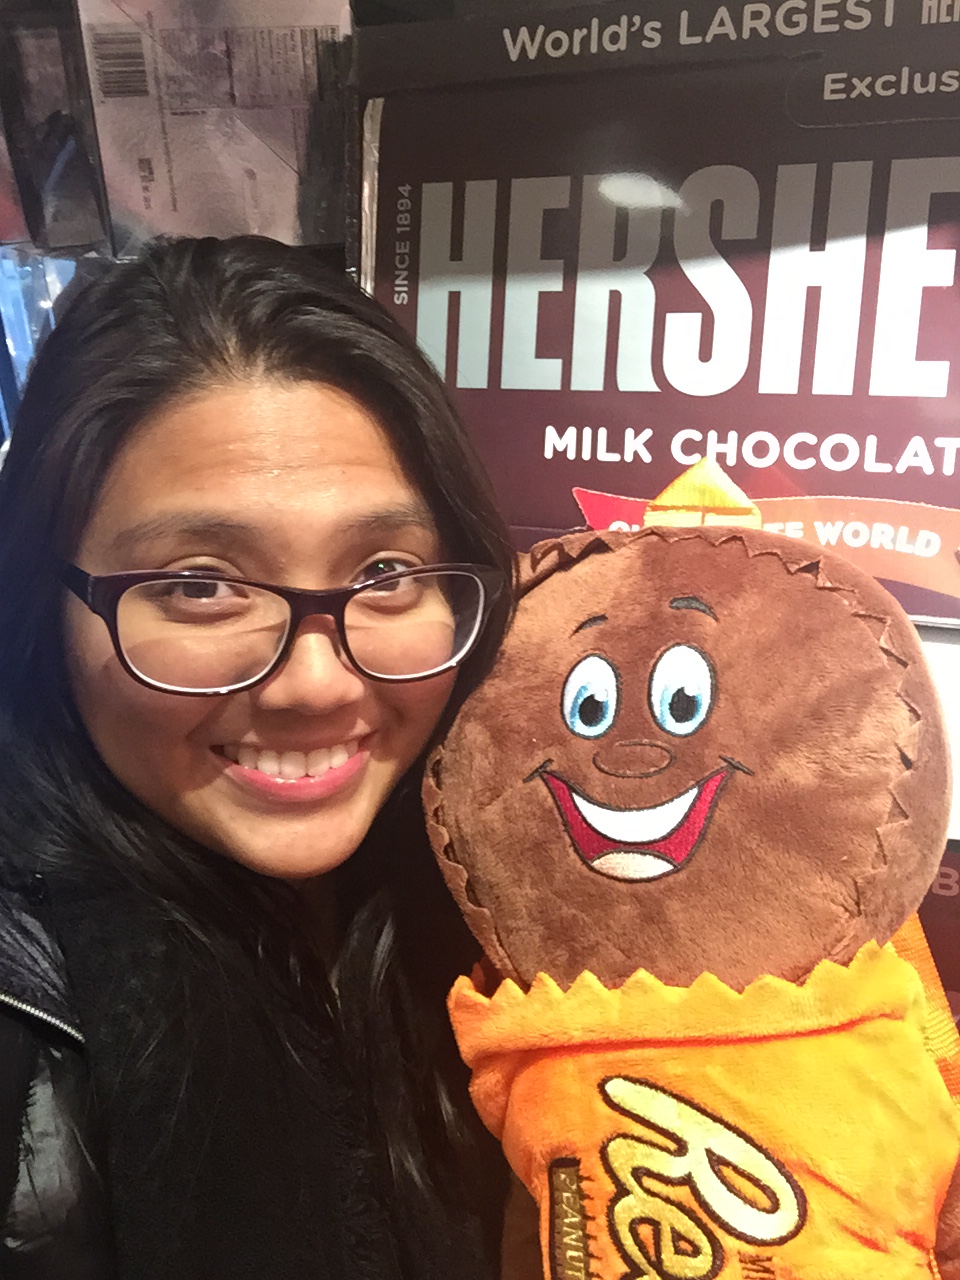 Me with Hershey's plush